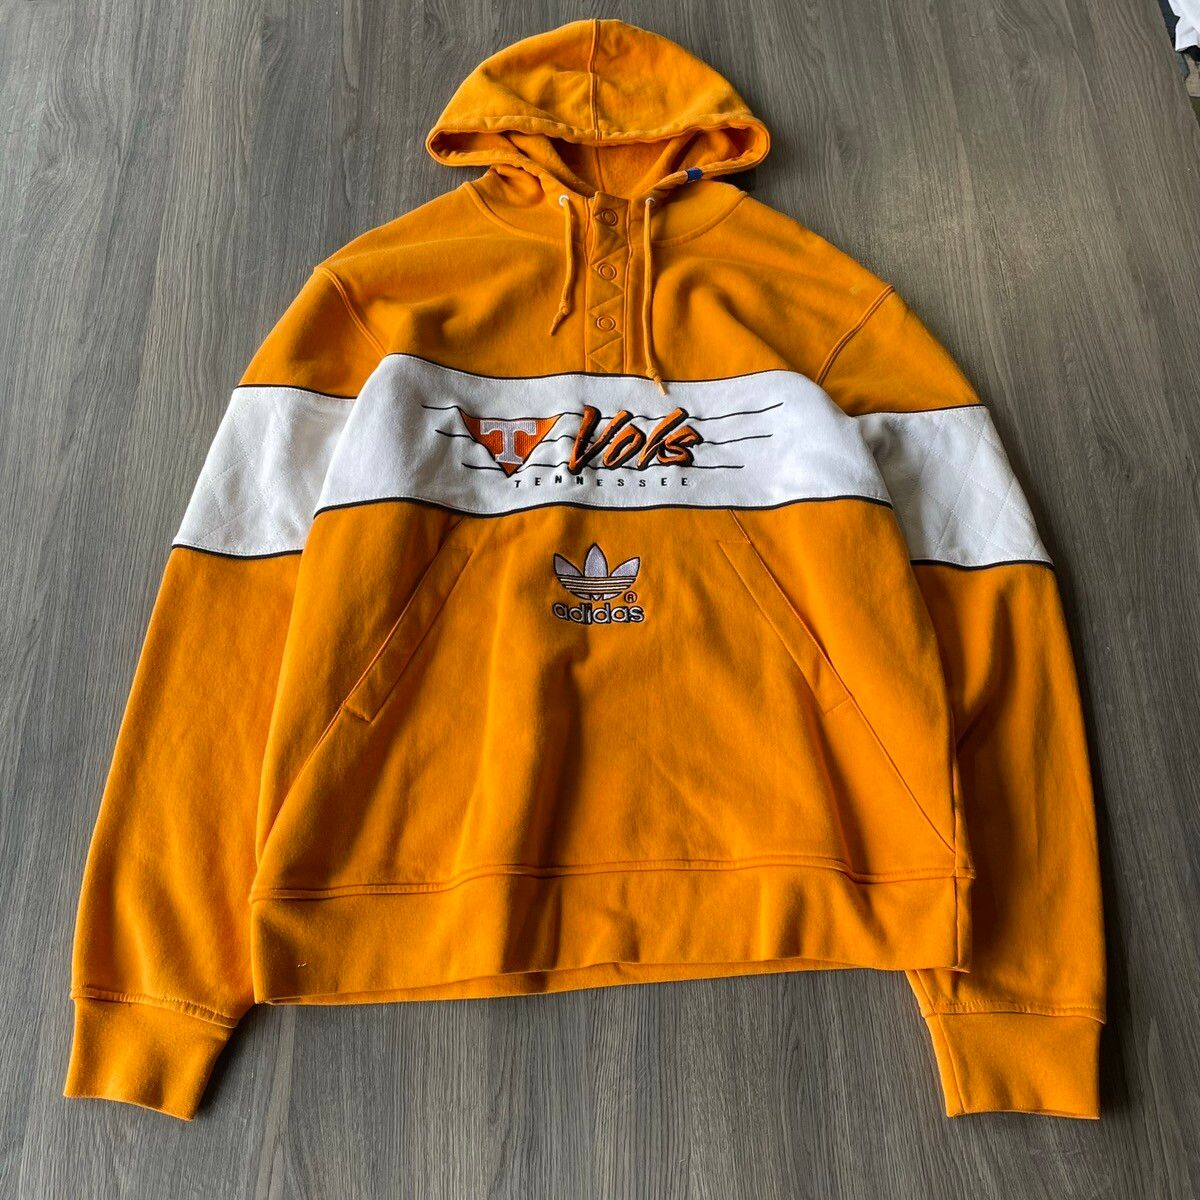 Adidas Vintage Tennessee Adidas Hoodie/ Streetwear/ Outdoor Style/ Size US XL / EU 56 / 4 - 2 Preview